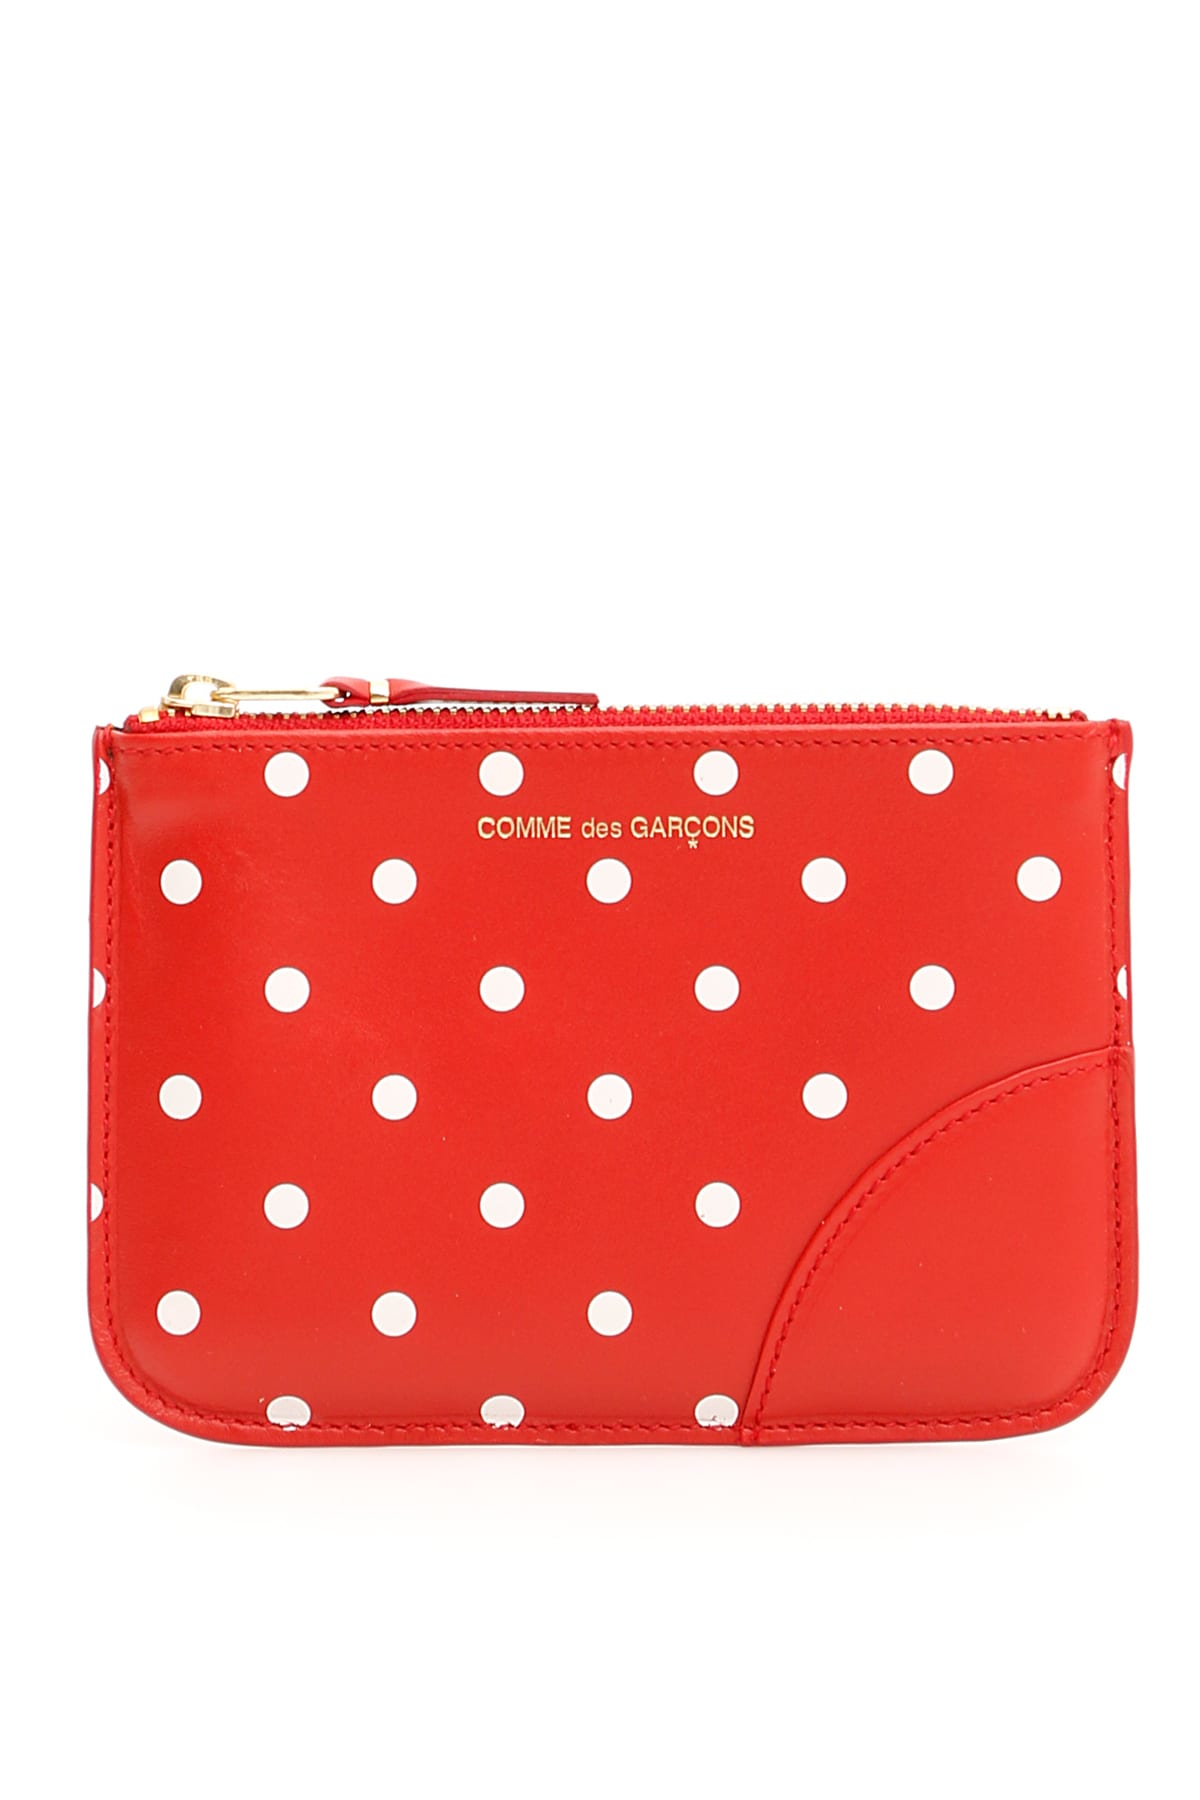 Comme Des Garçons Polka Dots Pouch In Red Red